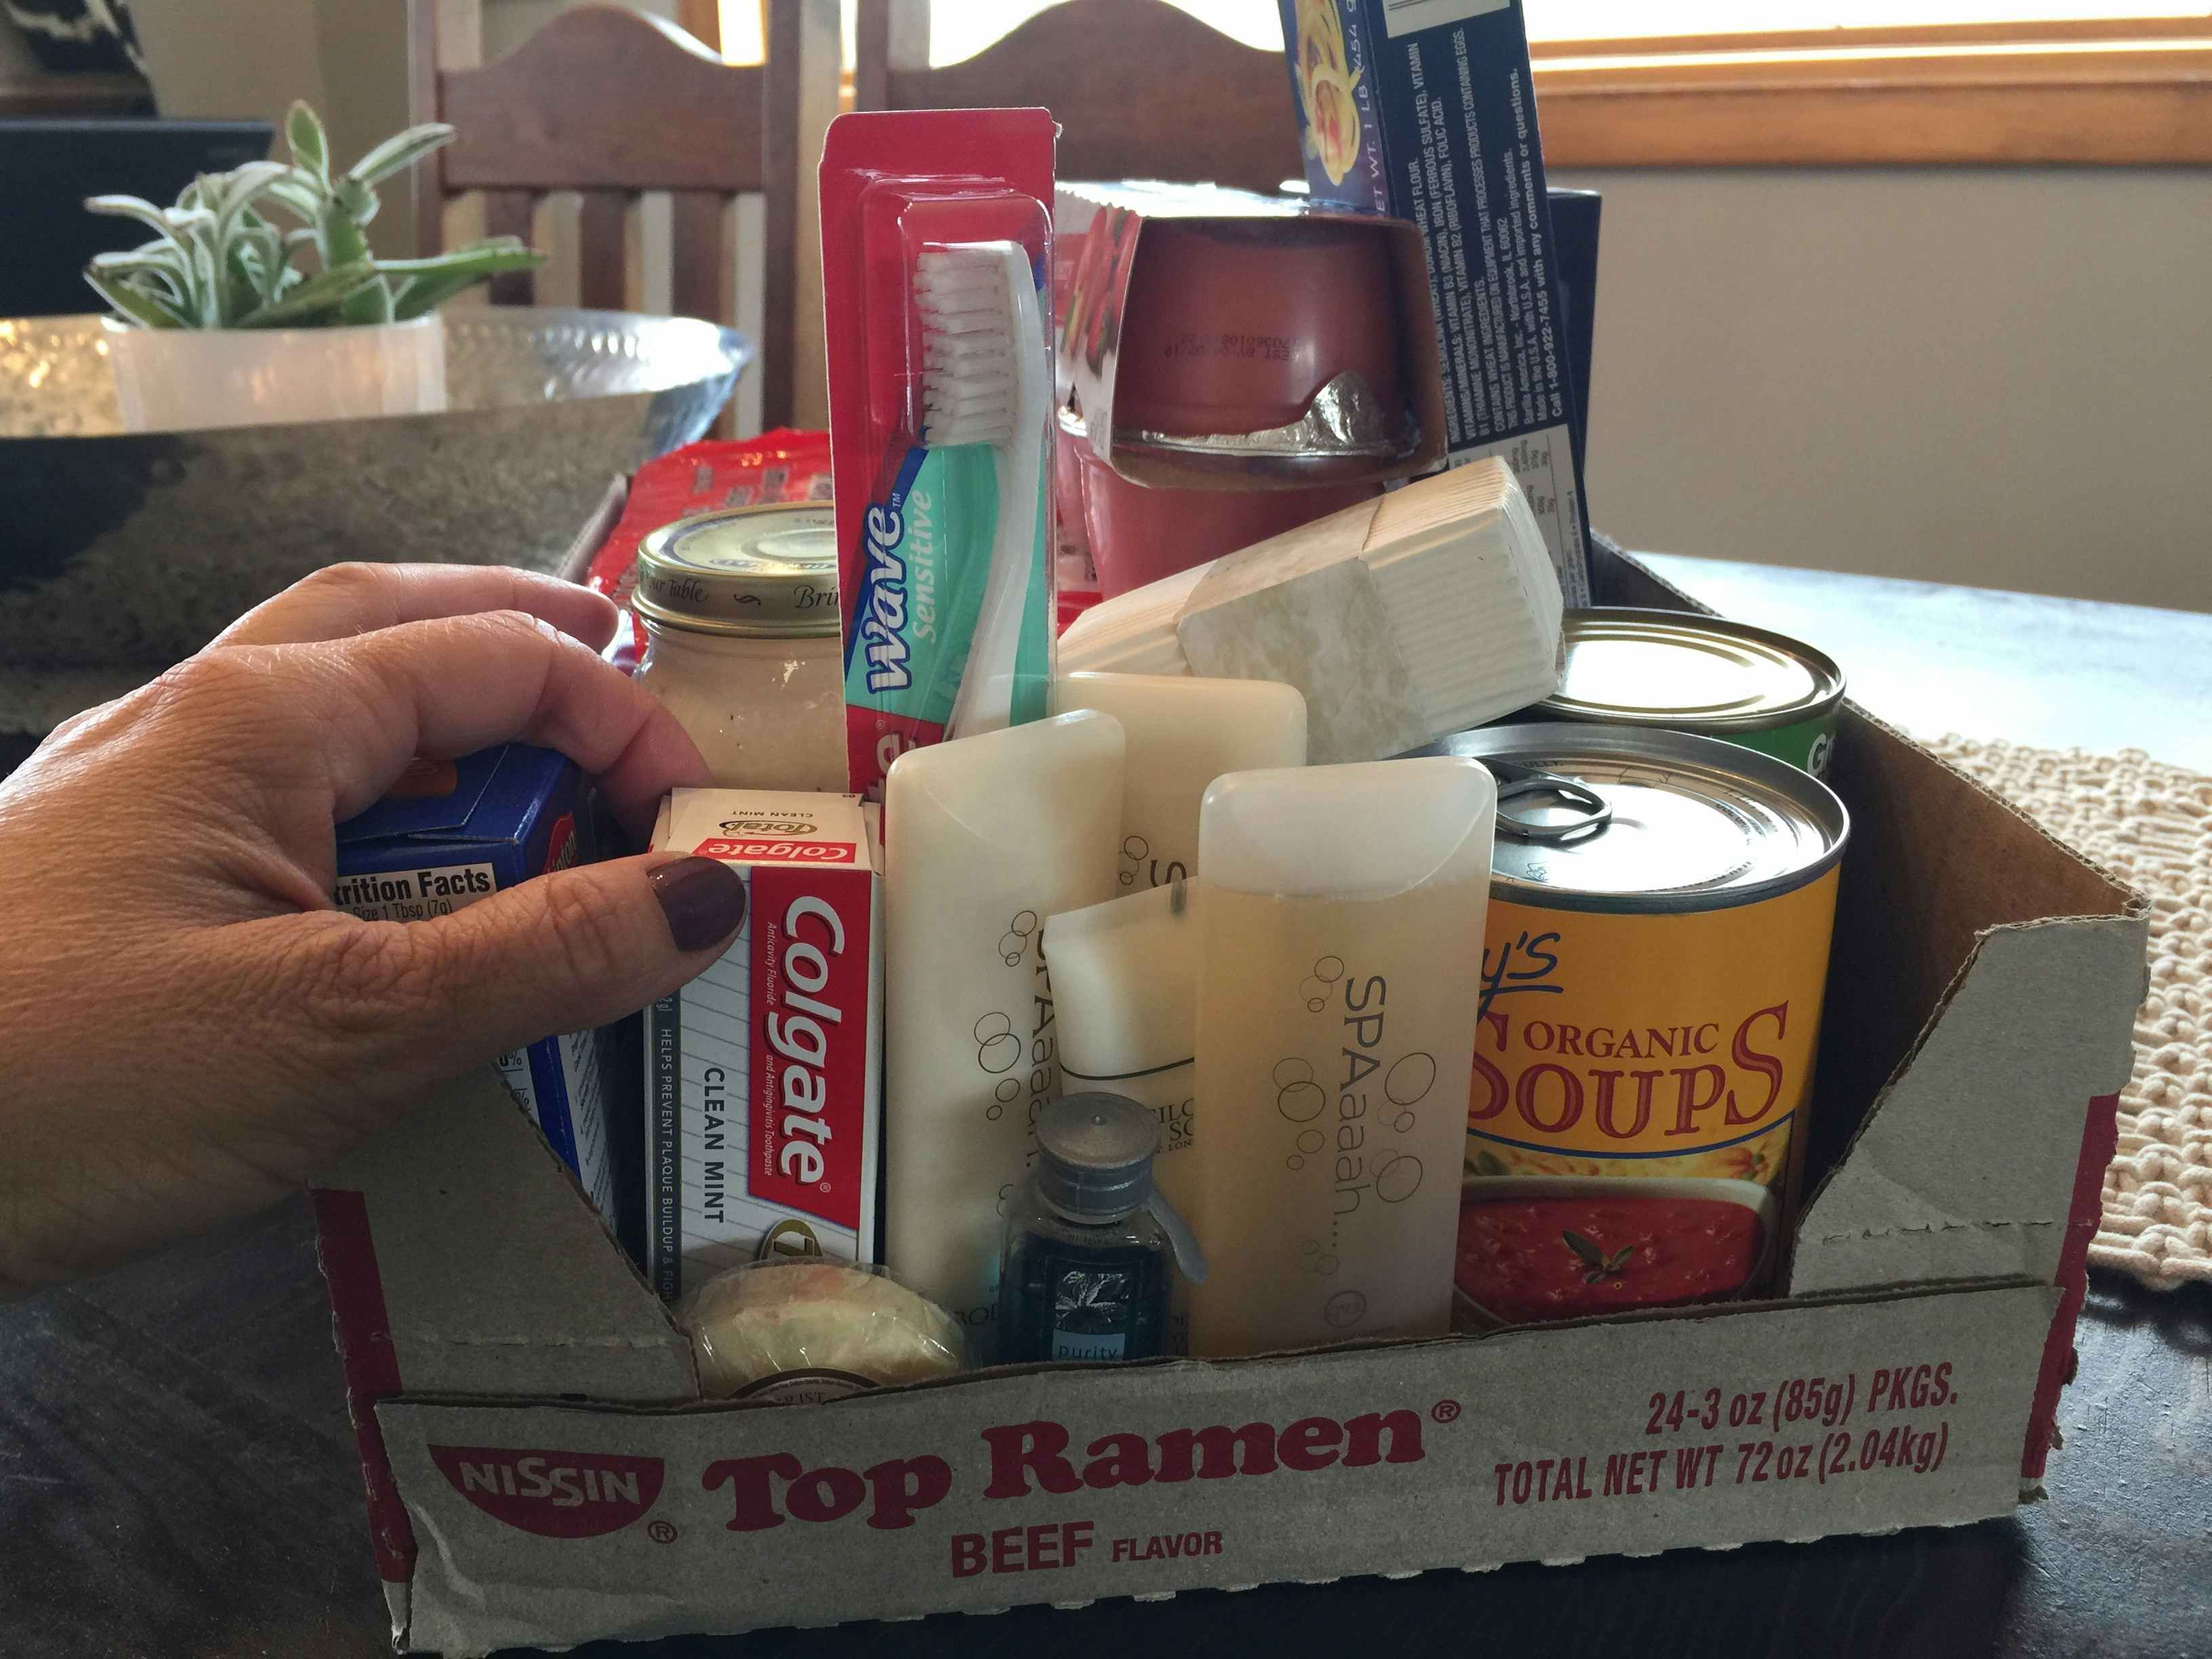 A person holding a tube of toothpaste in a box with other toiletries.